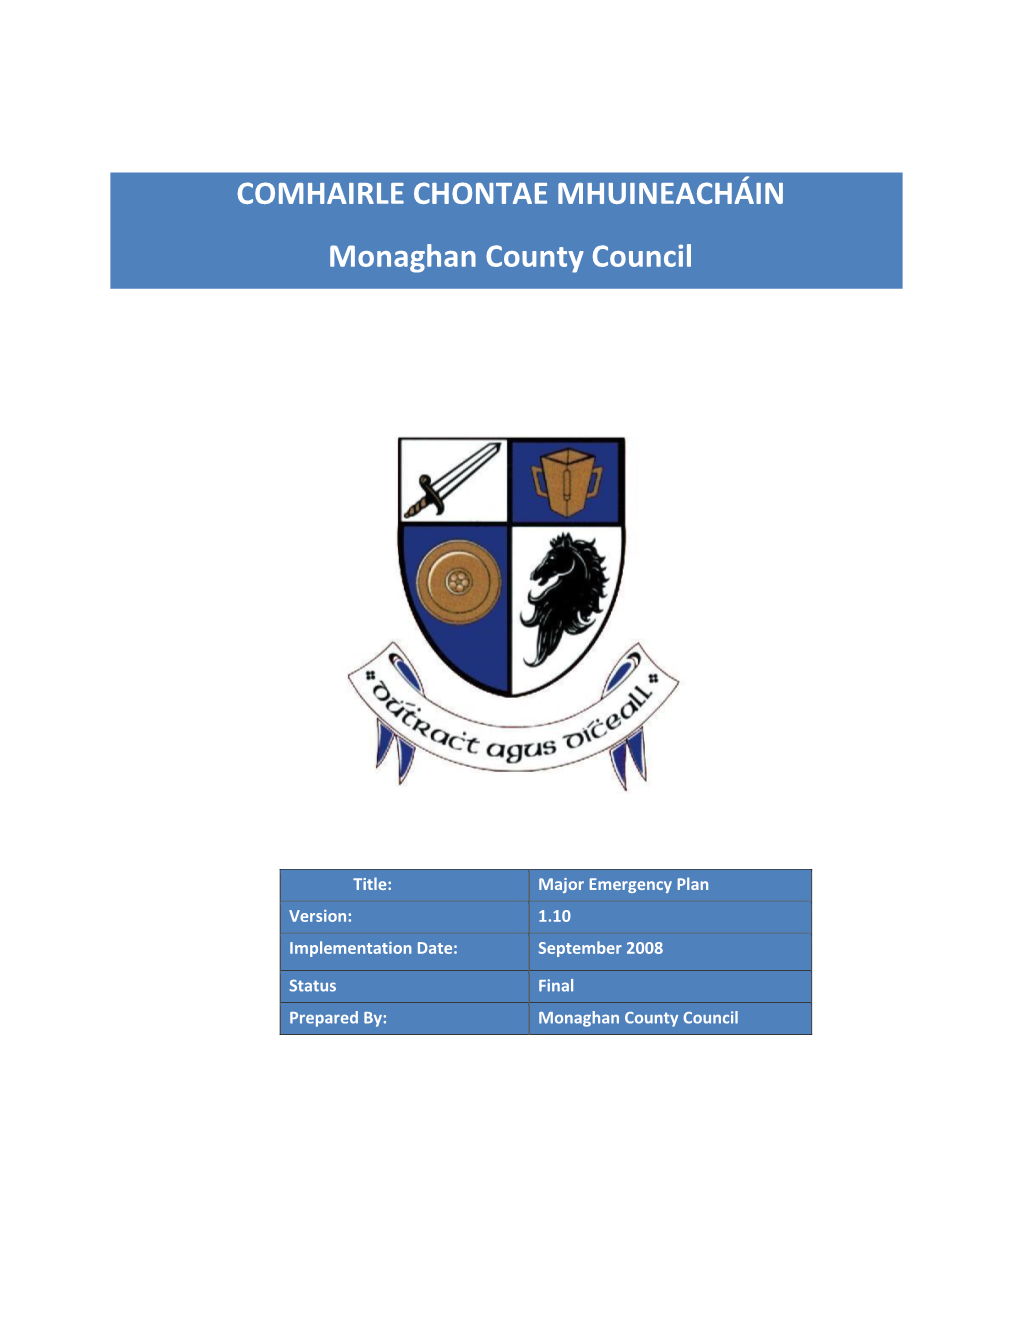 Monaghan County Council Major Emergency Plan Has Been Activated